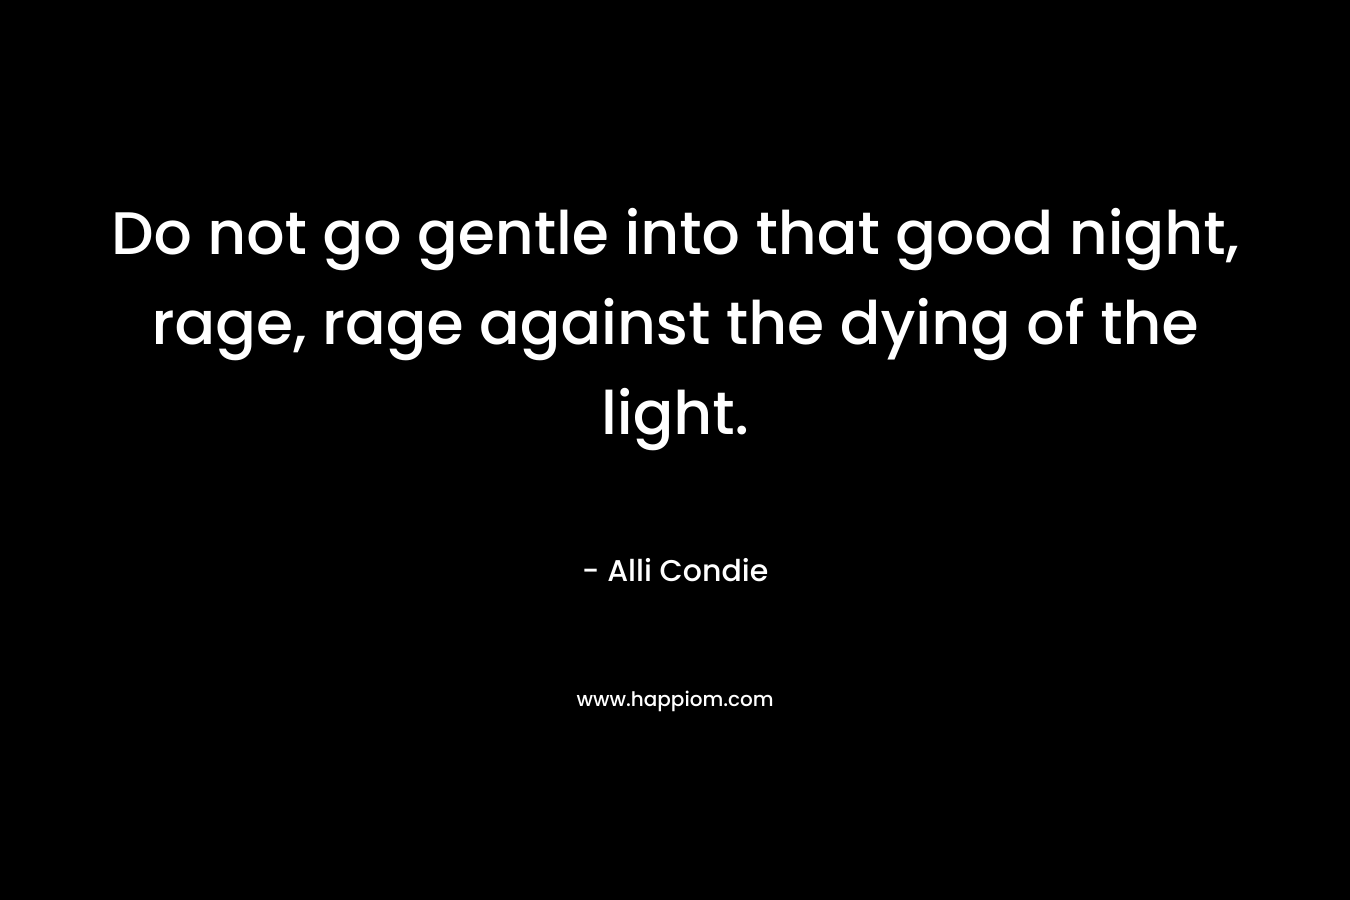 Do not go gentle into that good night, rage, rage against the dying of the light.